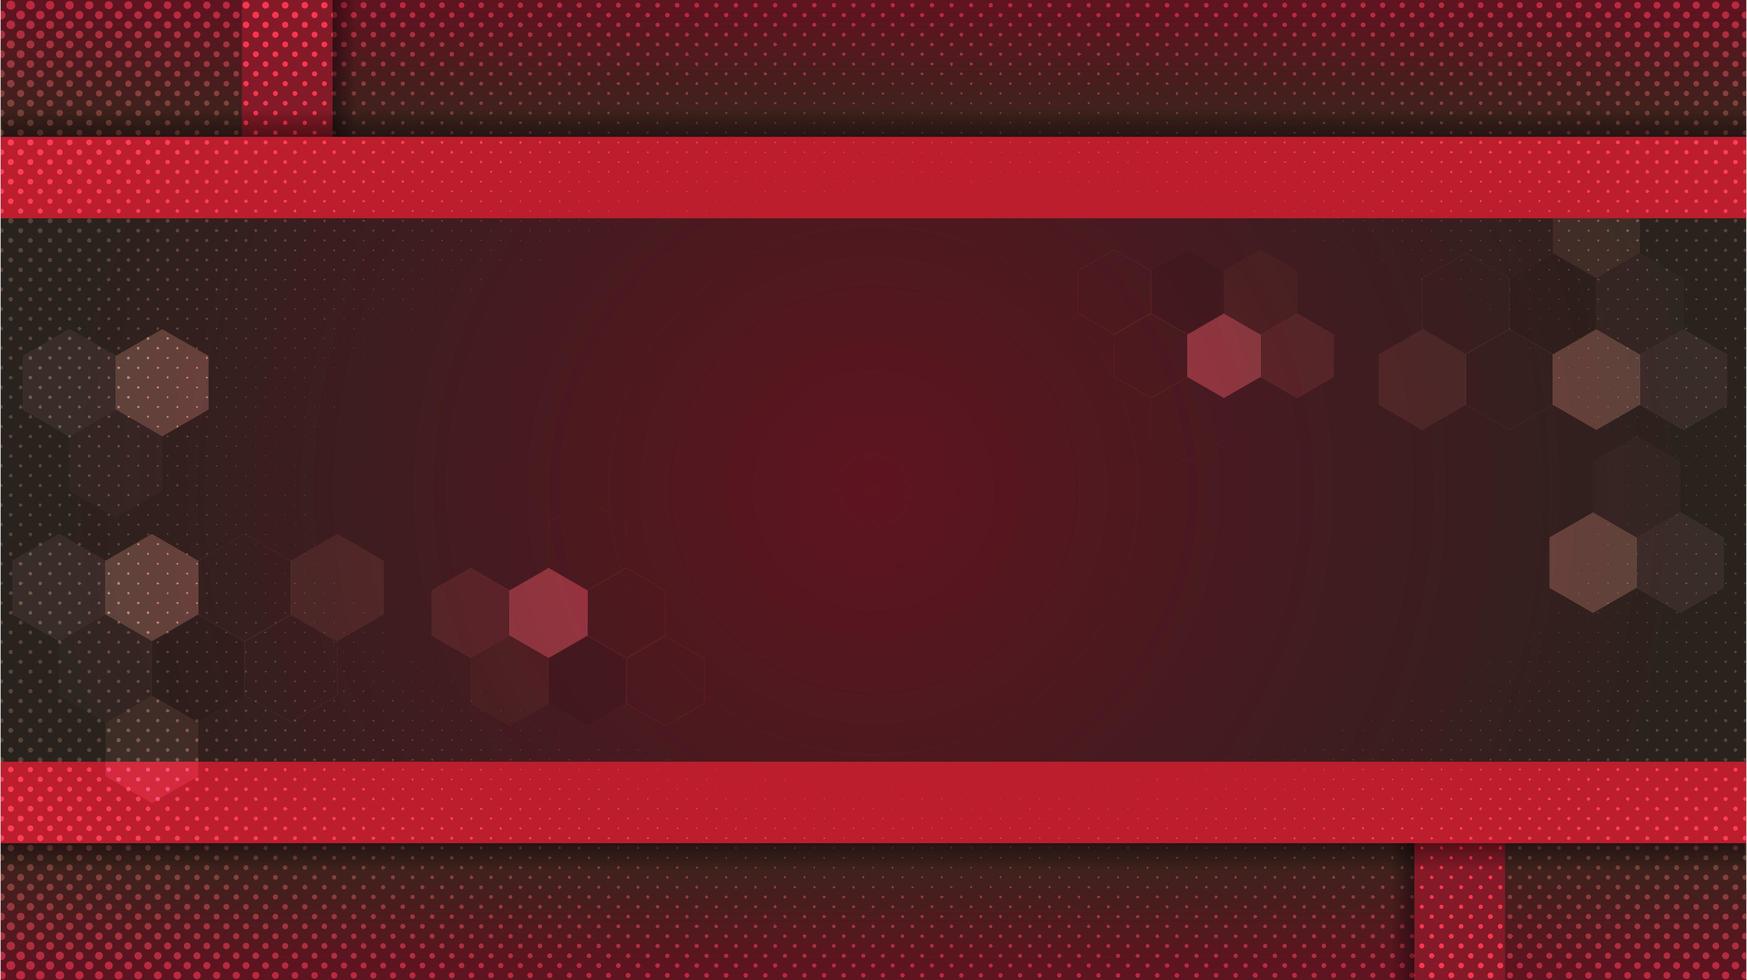 Abstract gradient red background with borders and shapes vector